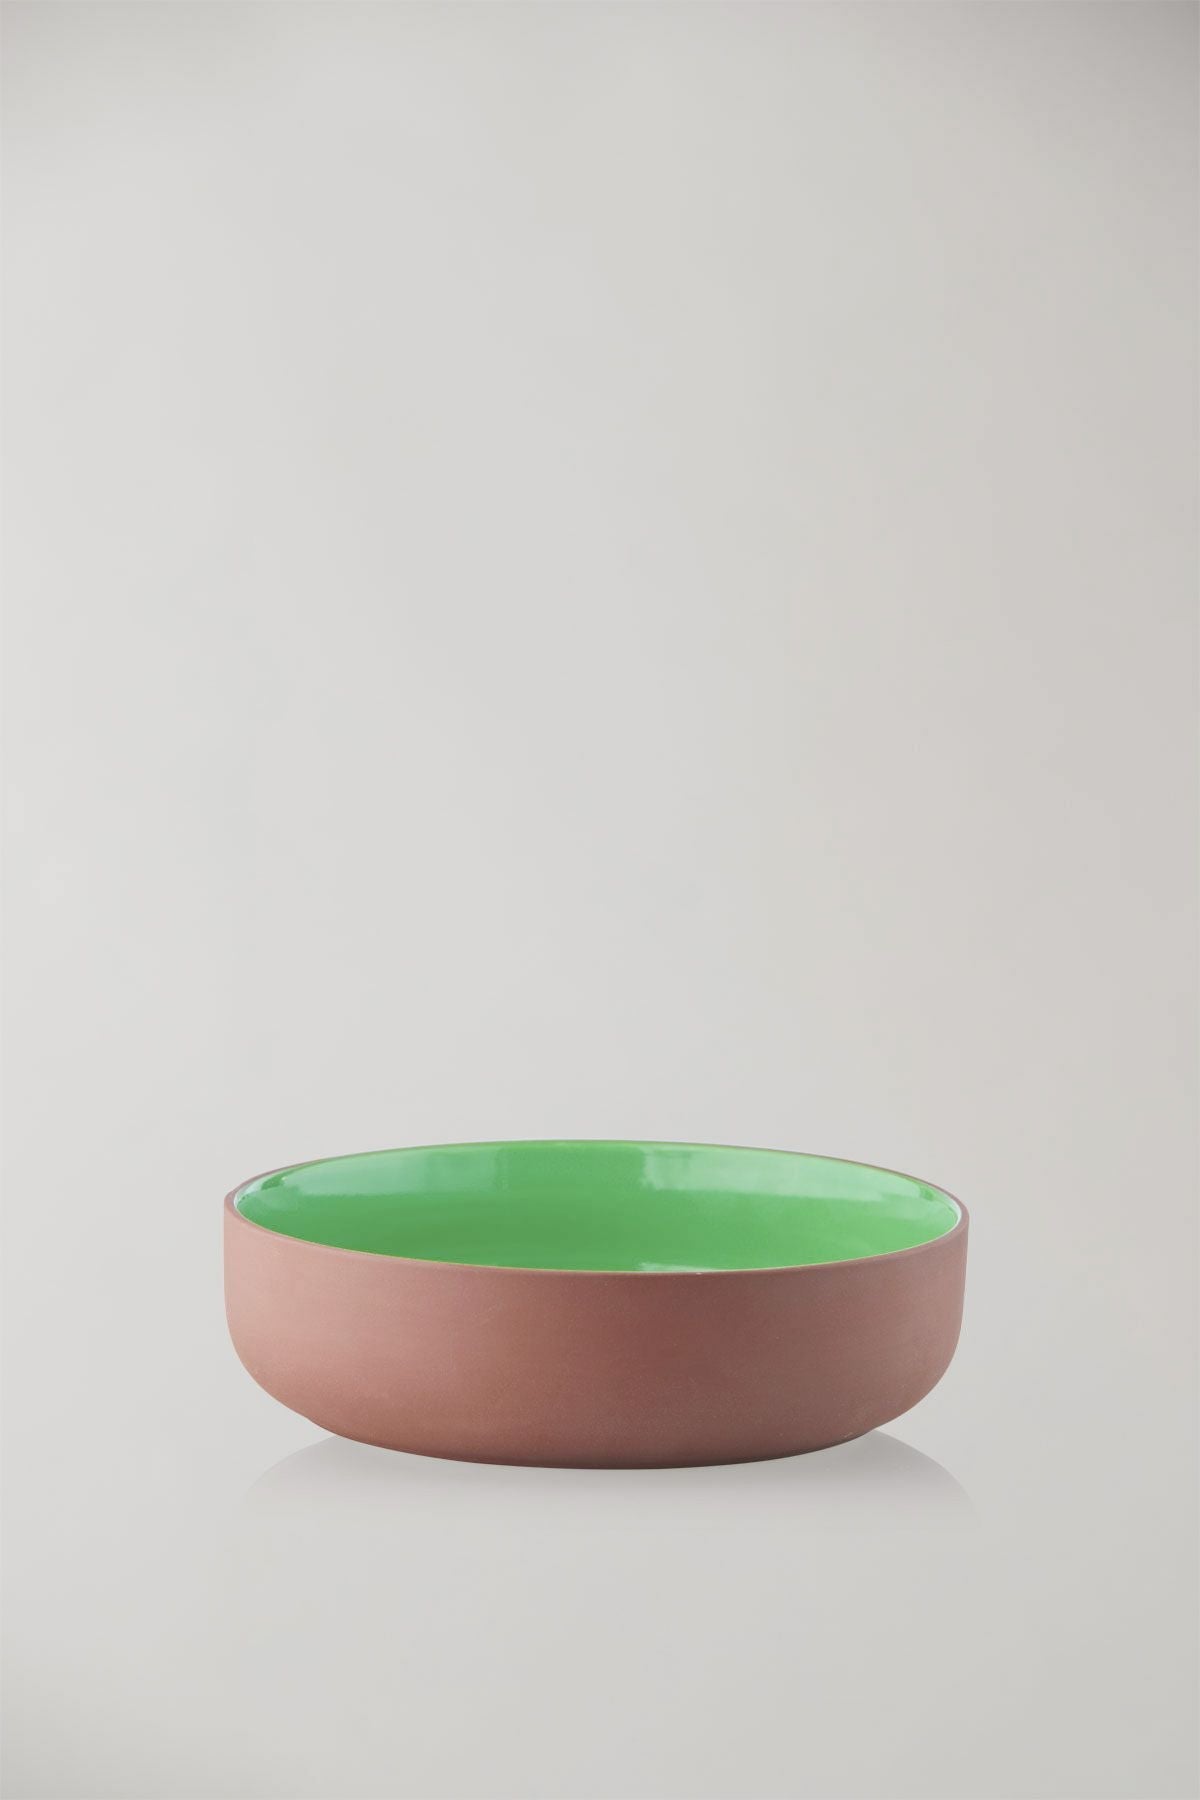 Studio About Clayware Serving Bowl, Terracotta/Green